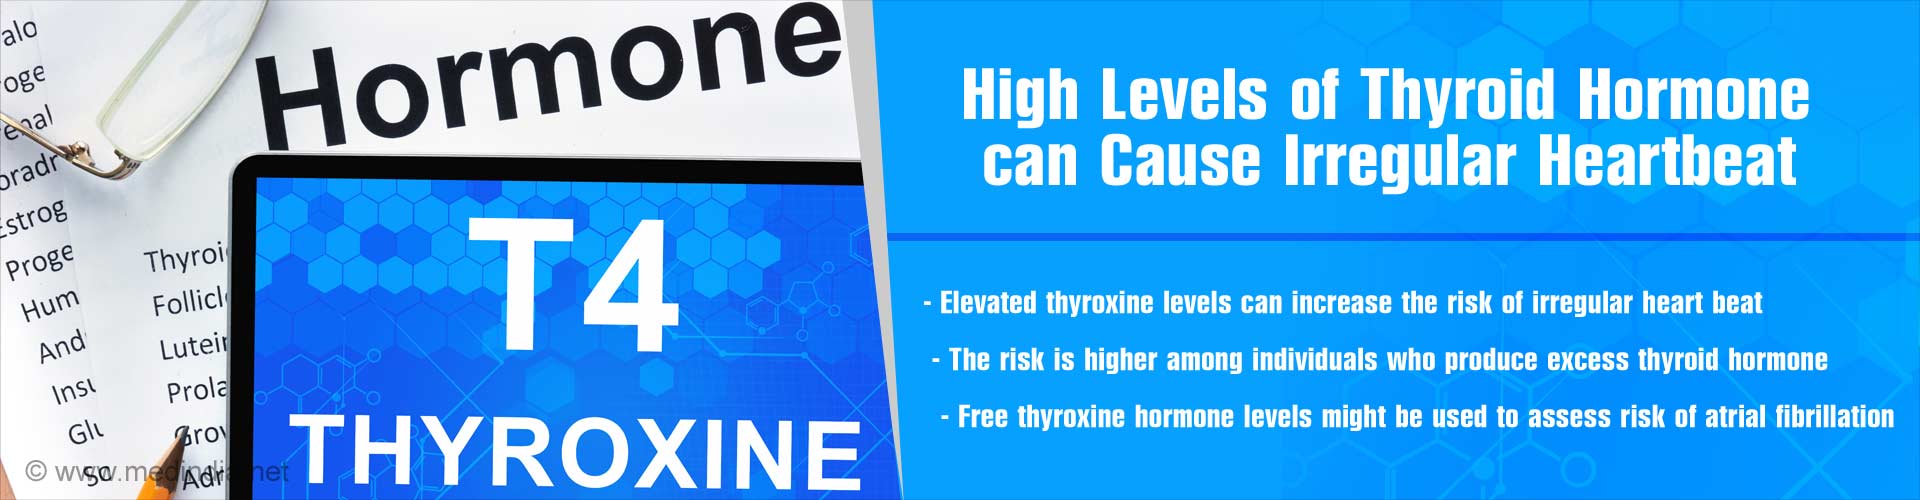 High levels of thyroid hormone can cause irregular heartbeat
- Elevated thyroxine levels can increase the risk of irregular heart beat
- The risk is higher among individuals who produce excess thyroid hormone
- Free thryroxine hormone levels might be used to assess risk of atrial fibrillation